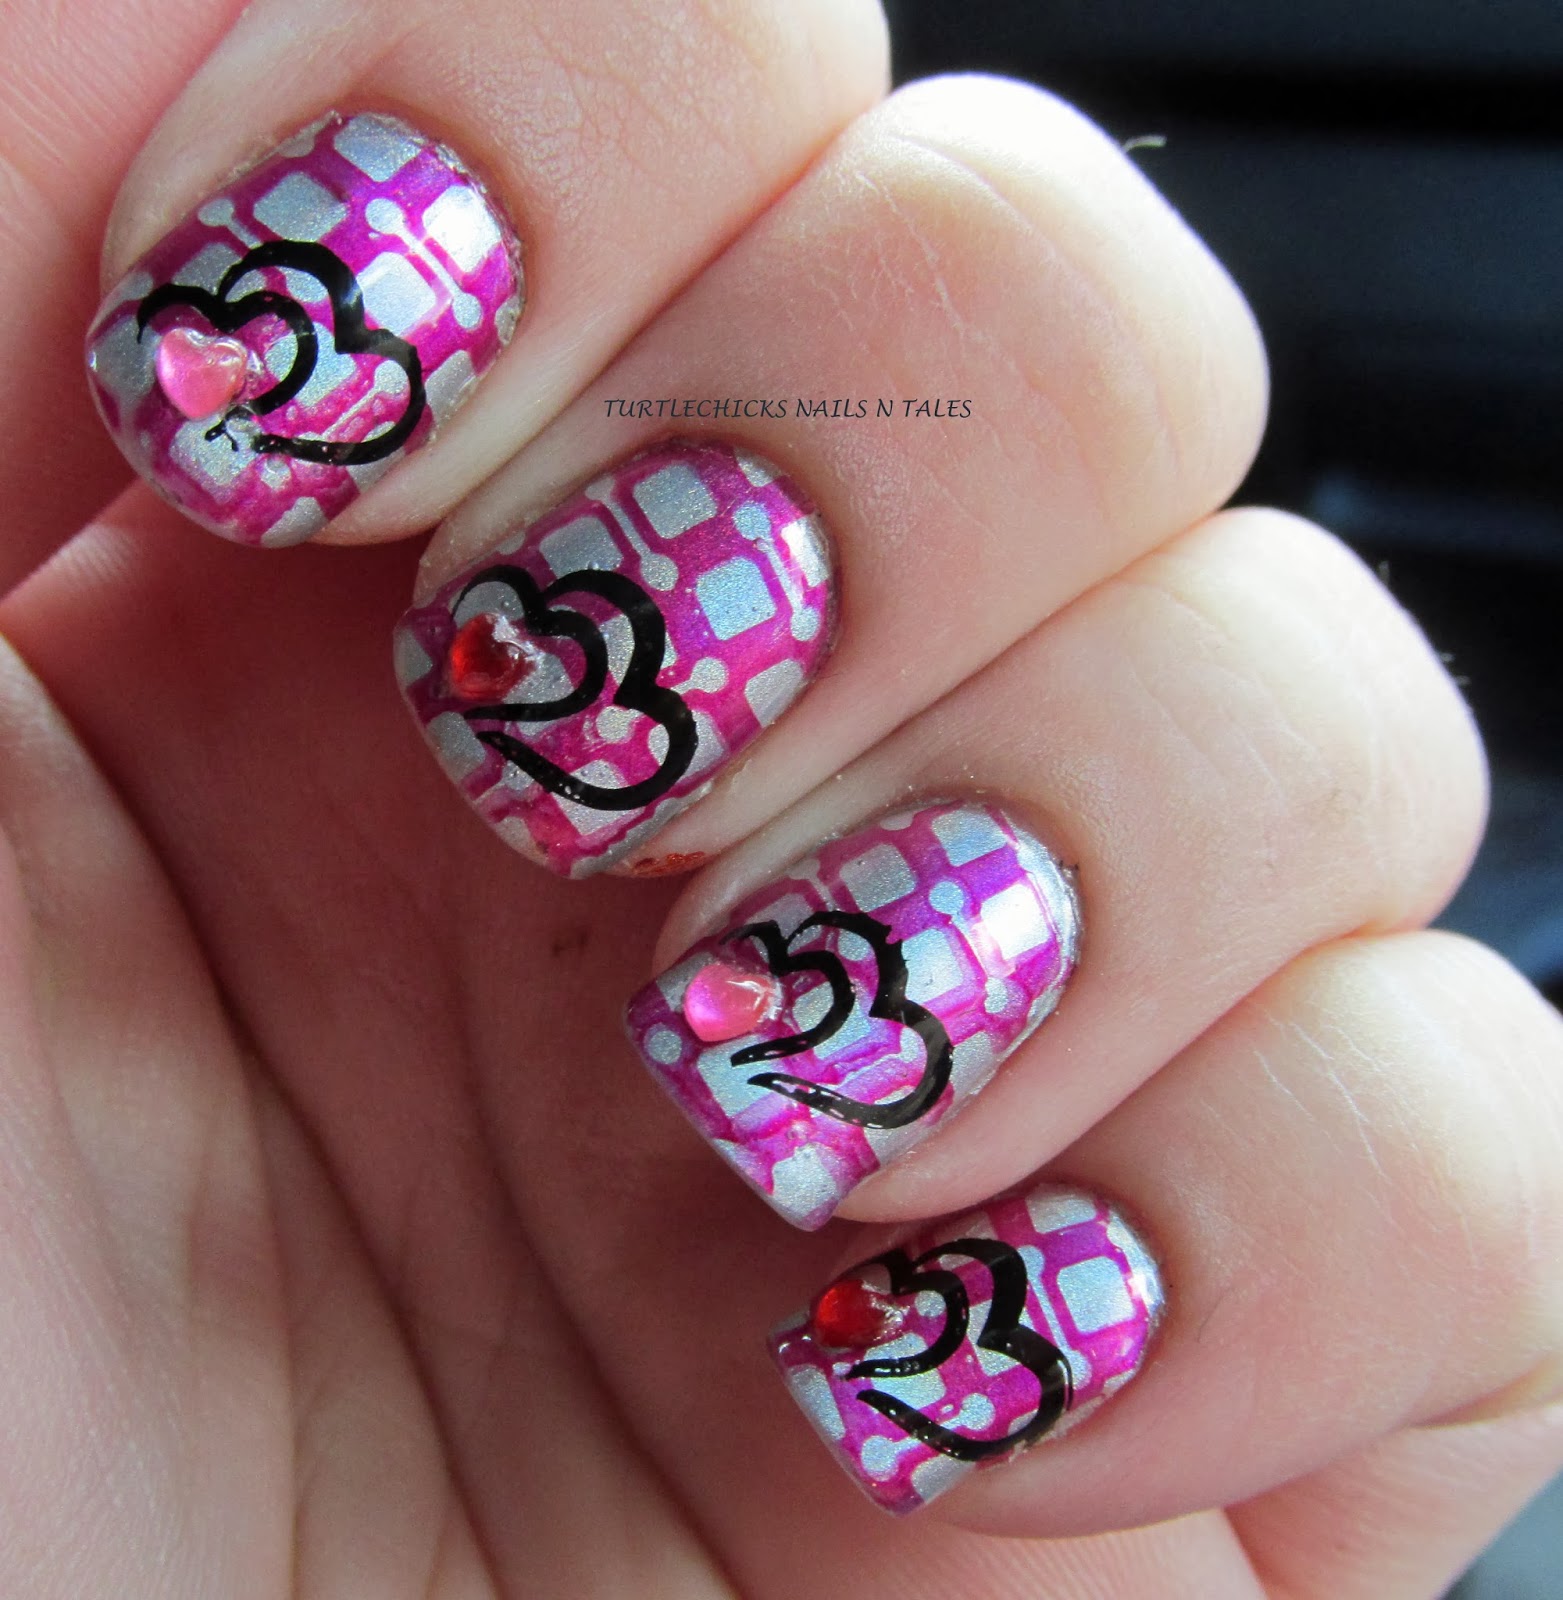 Turtlechick's Nails N Tales: Chromatic Creation Hearts